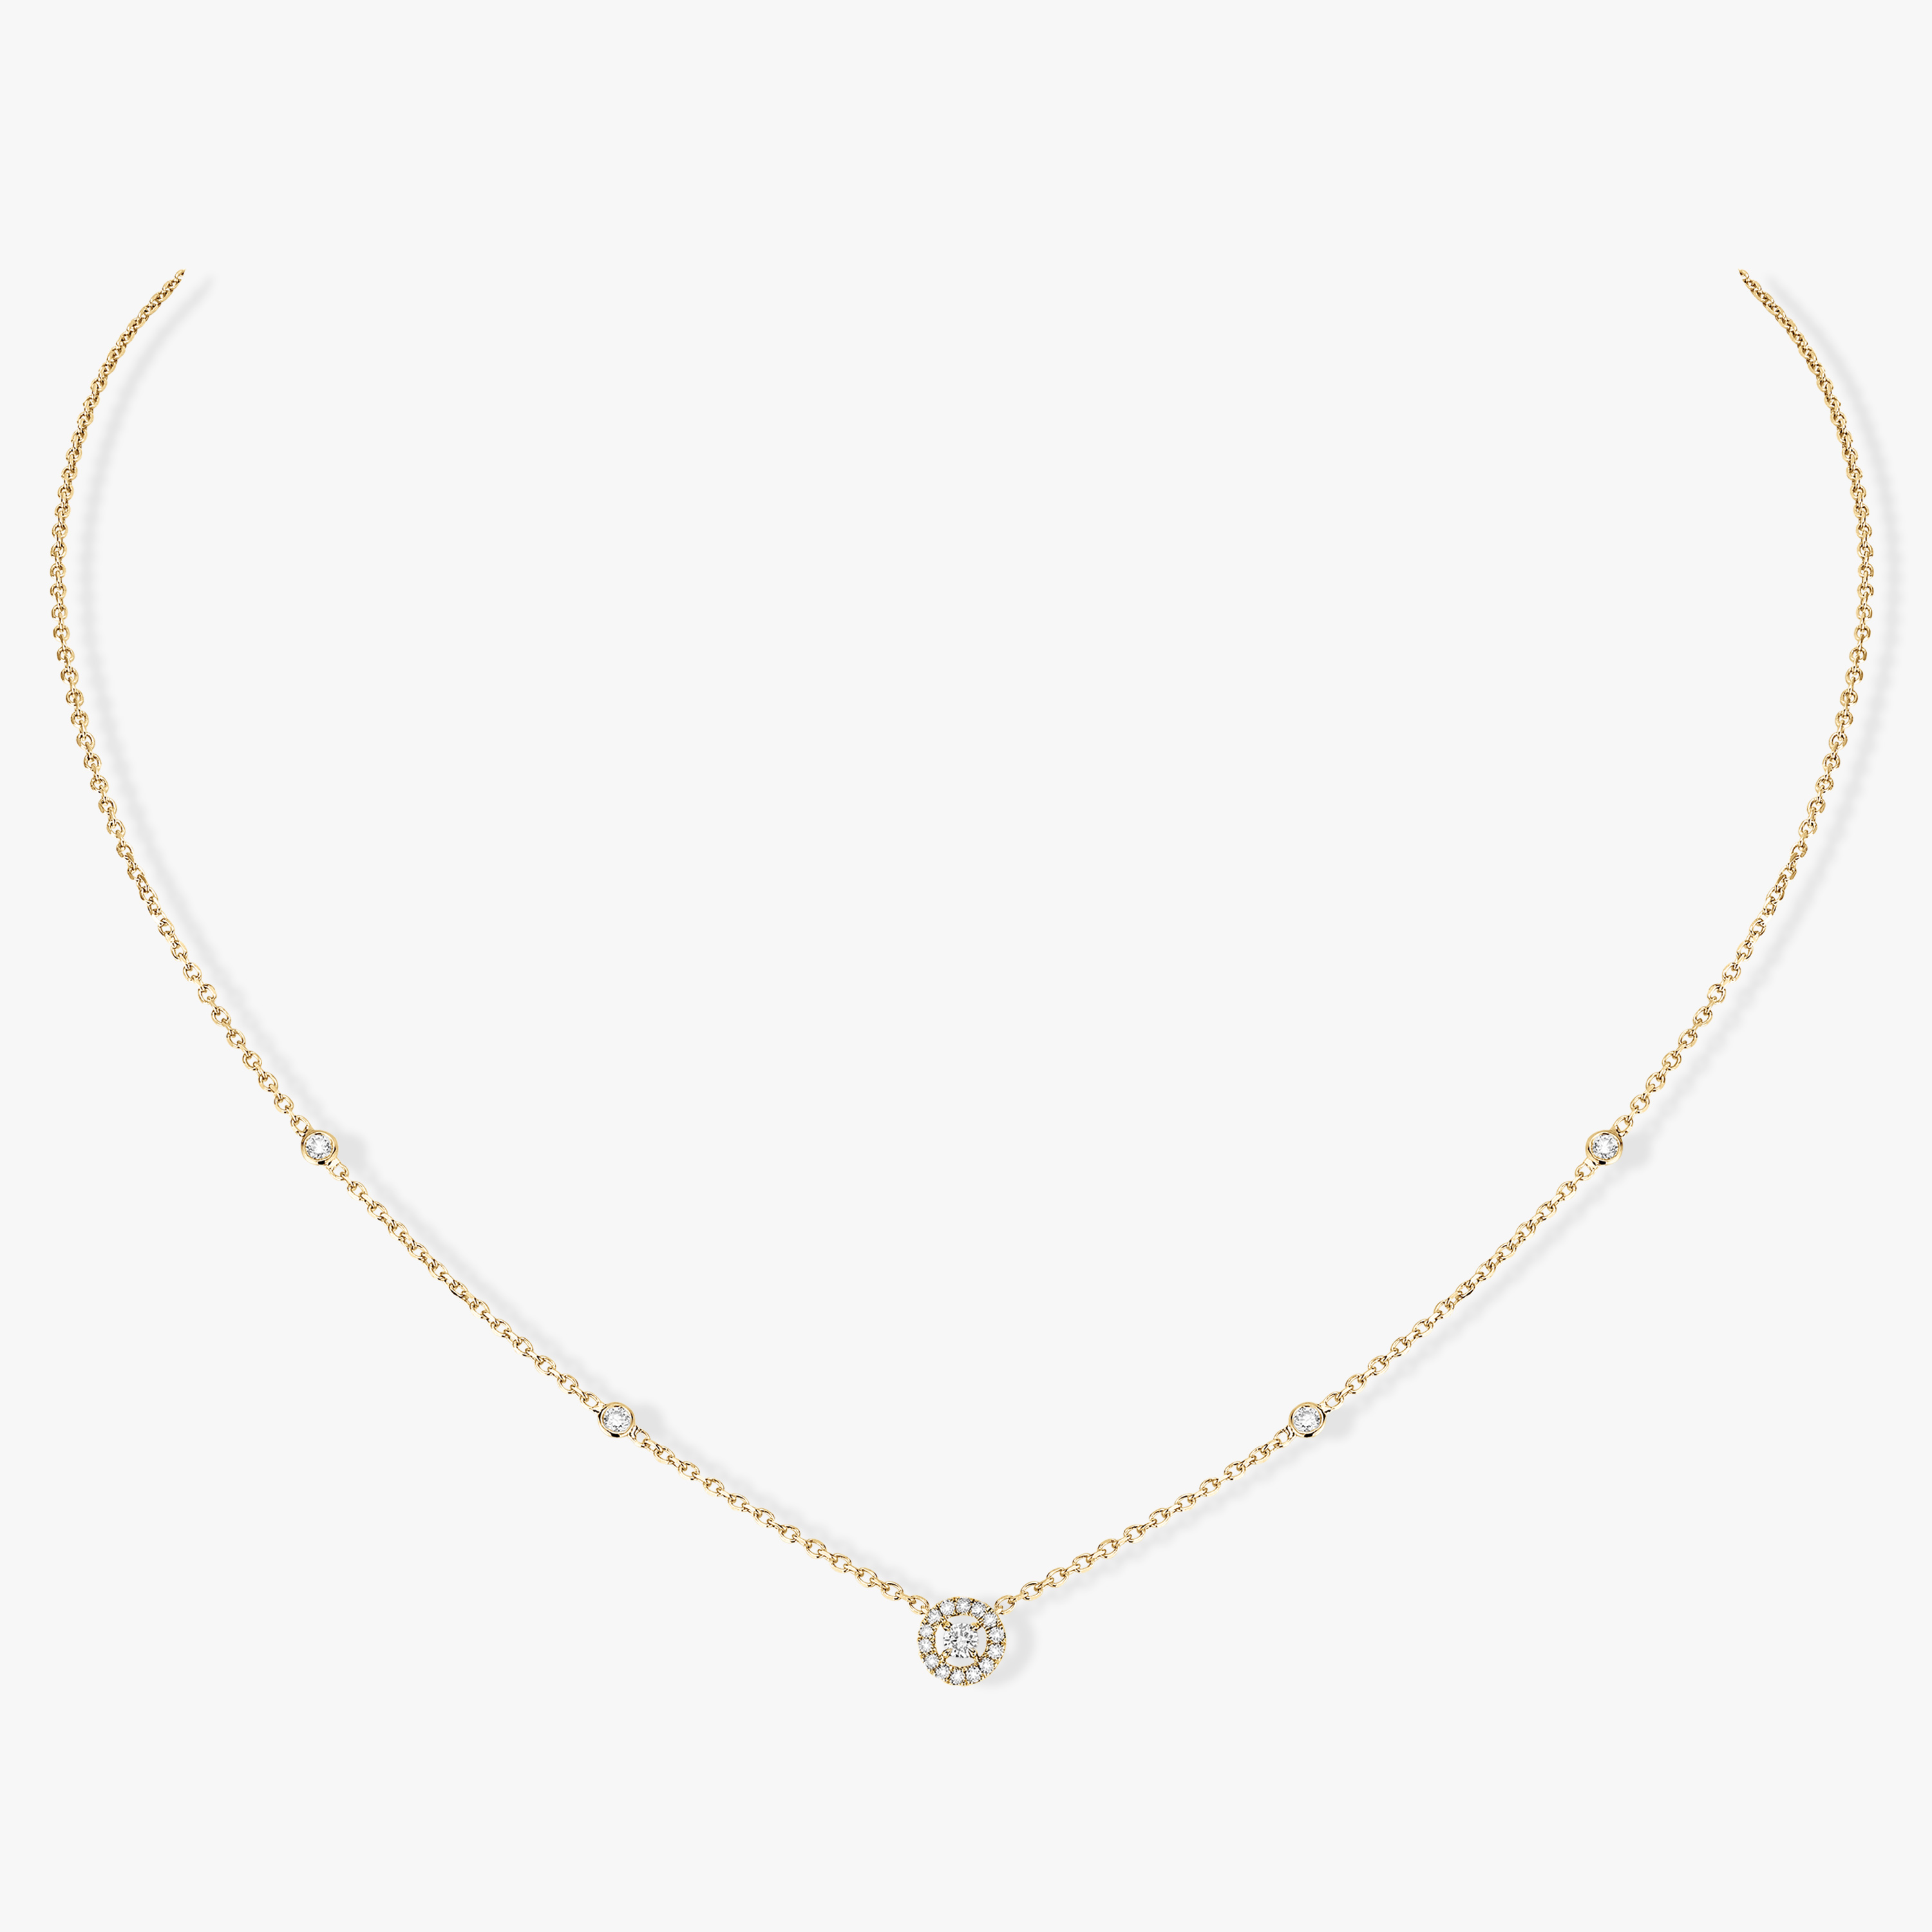 Joy XS Yellow Gold For Her Diamond Necklace 05370-YG